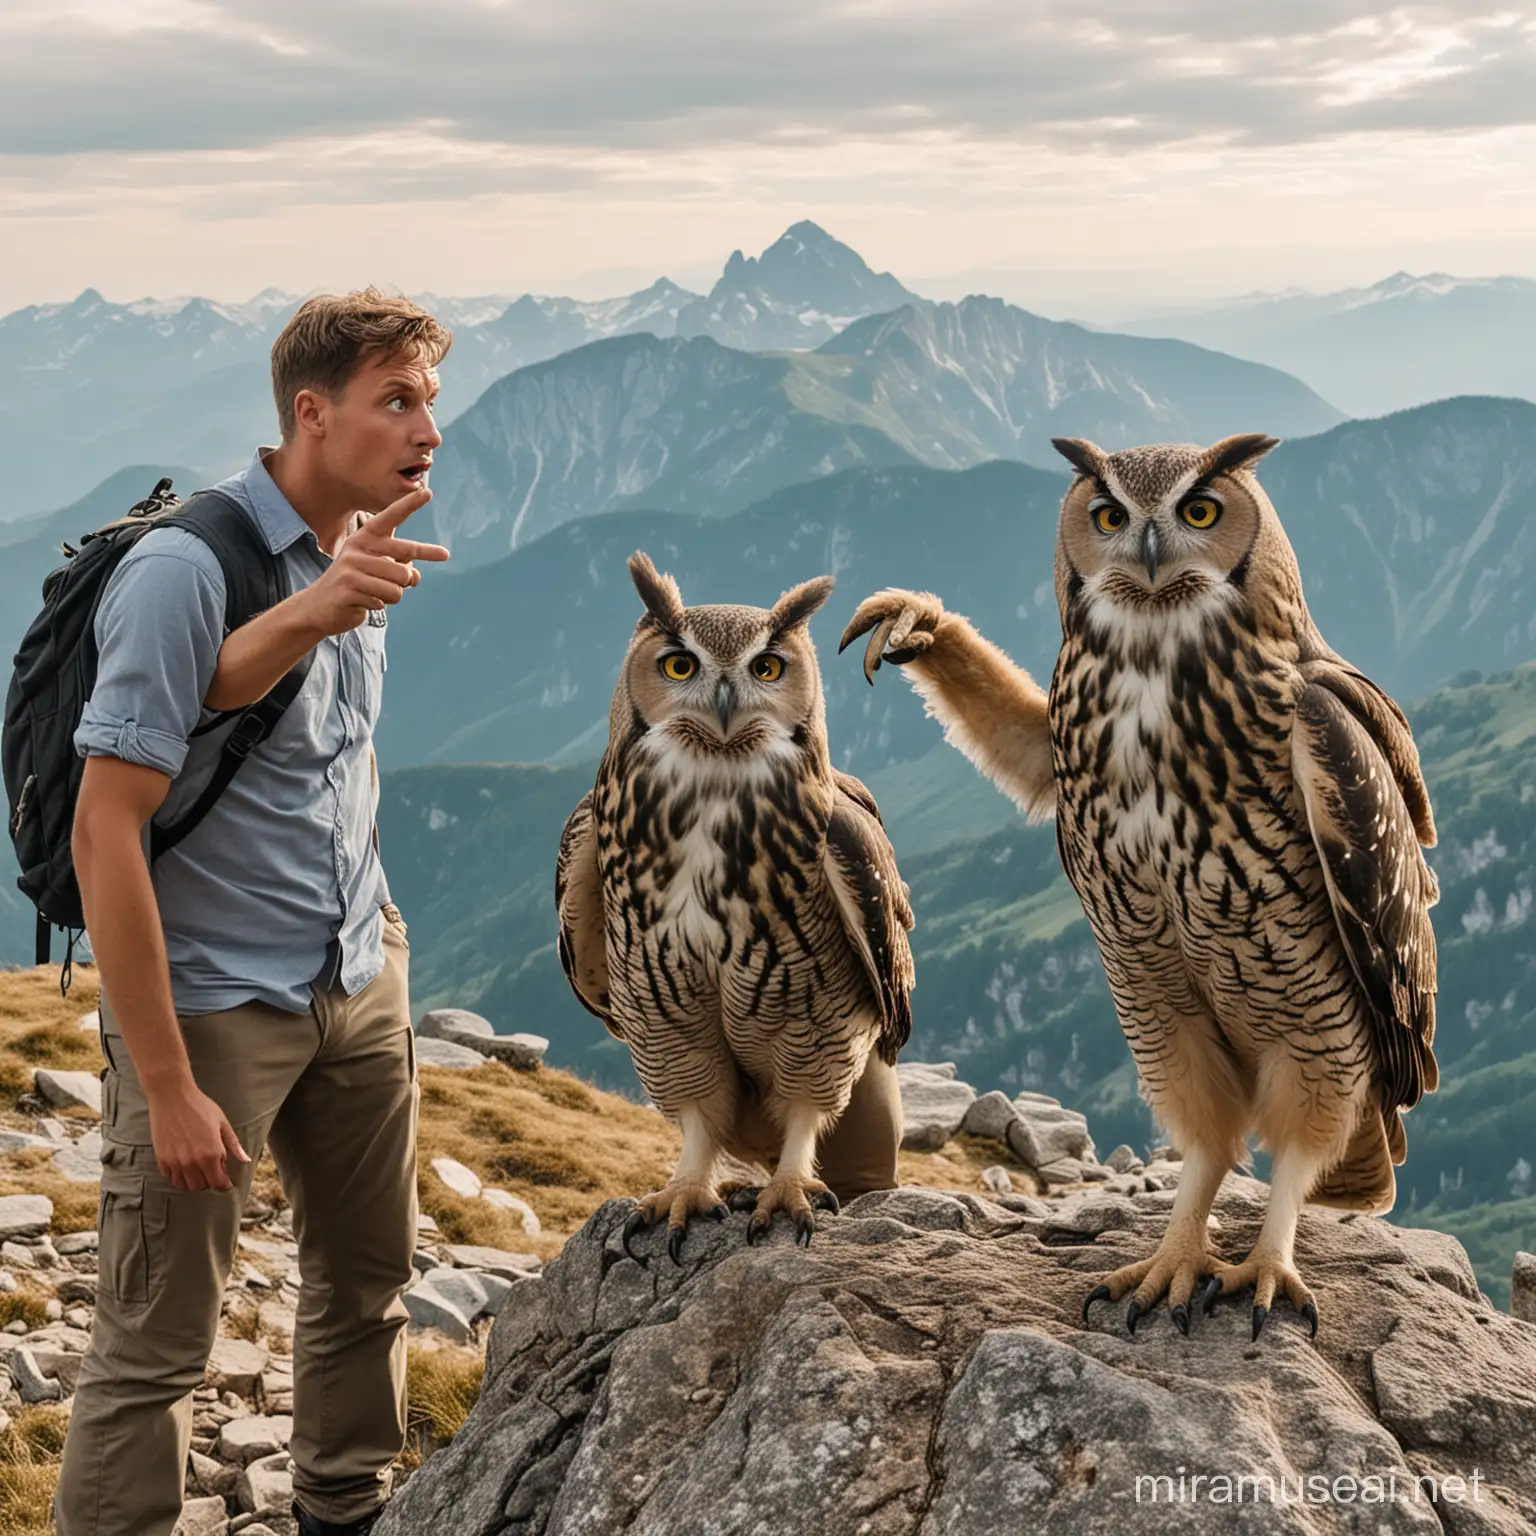 Tow confused germans pointing at an owl on a mountain top
